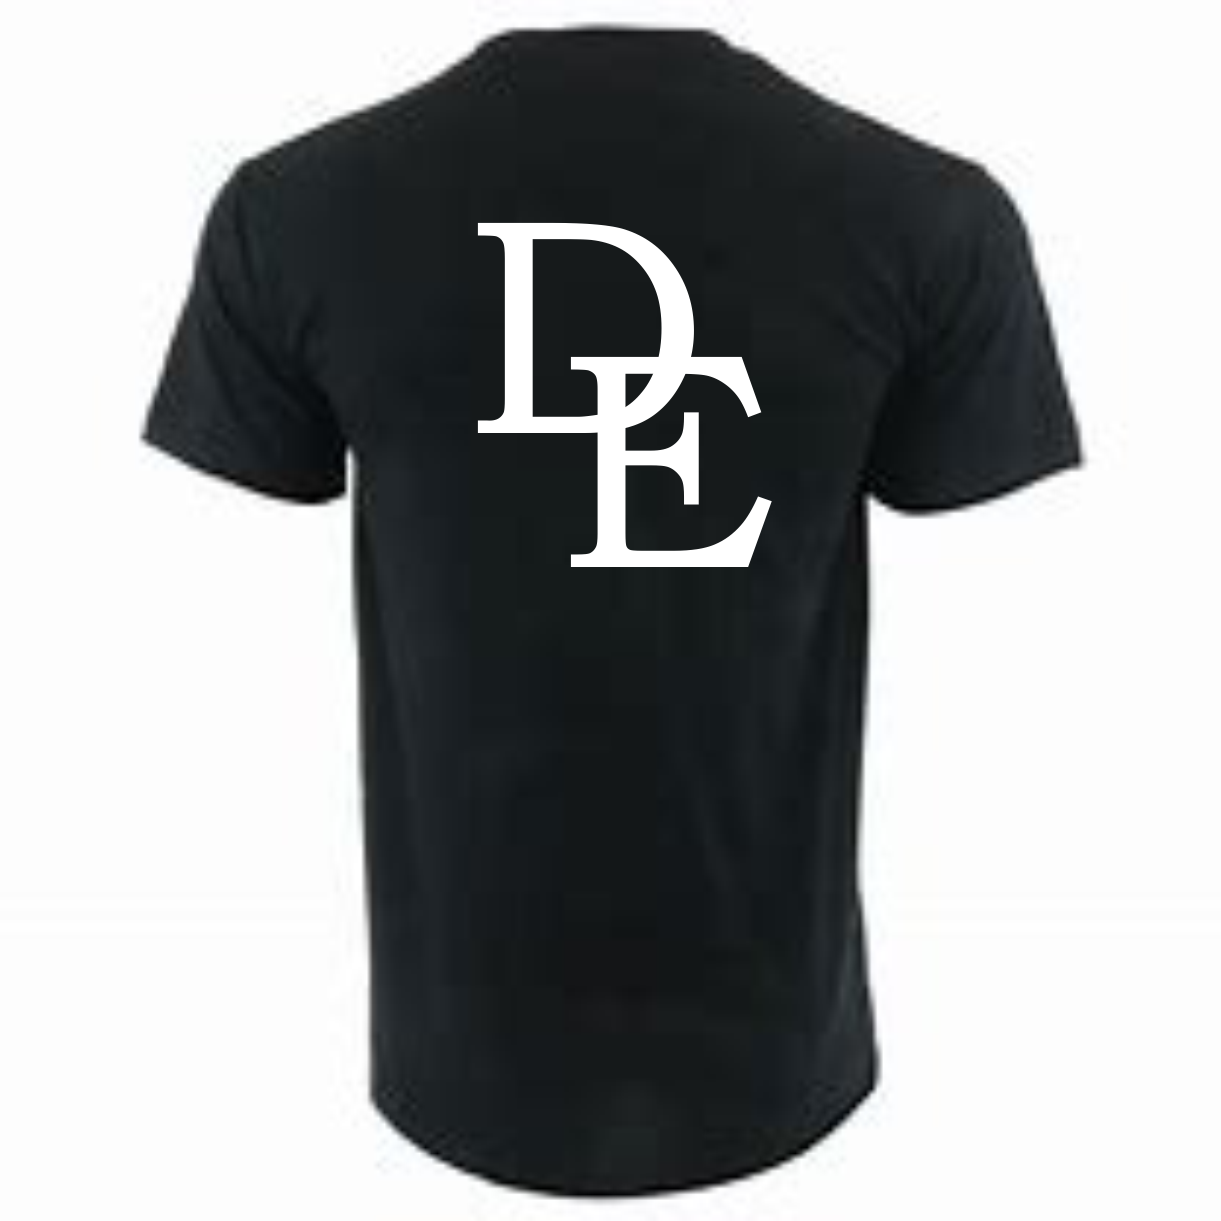 DE Short-Sleeved Cotton T-shirt - Adult & Youth